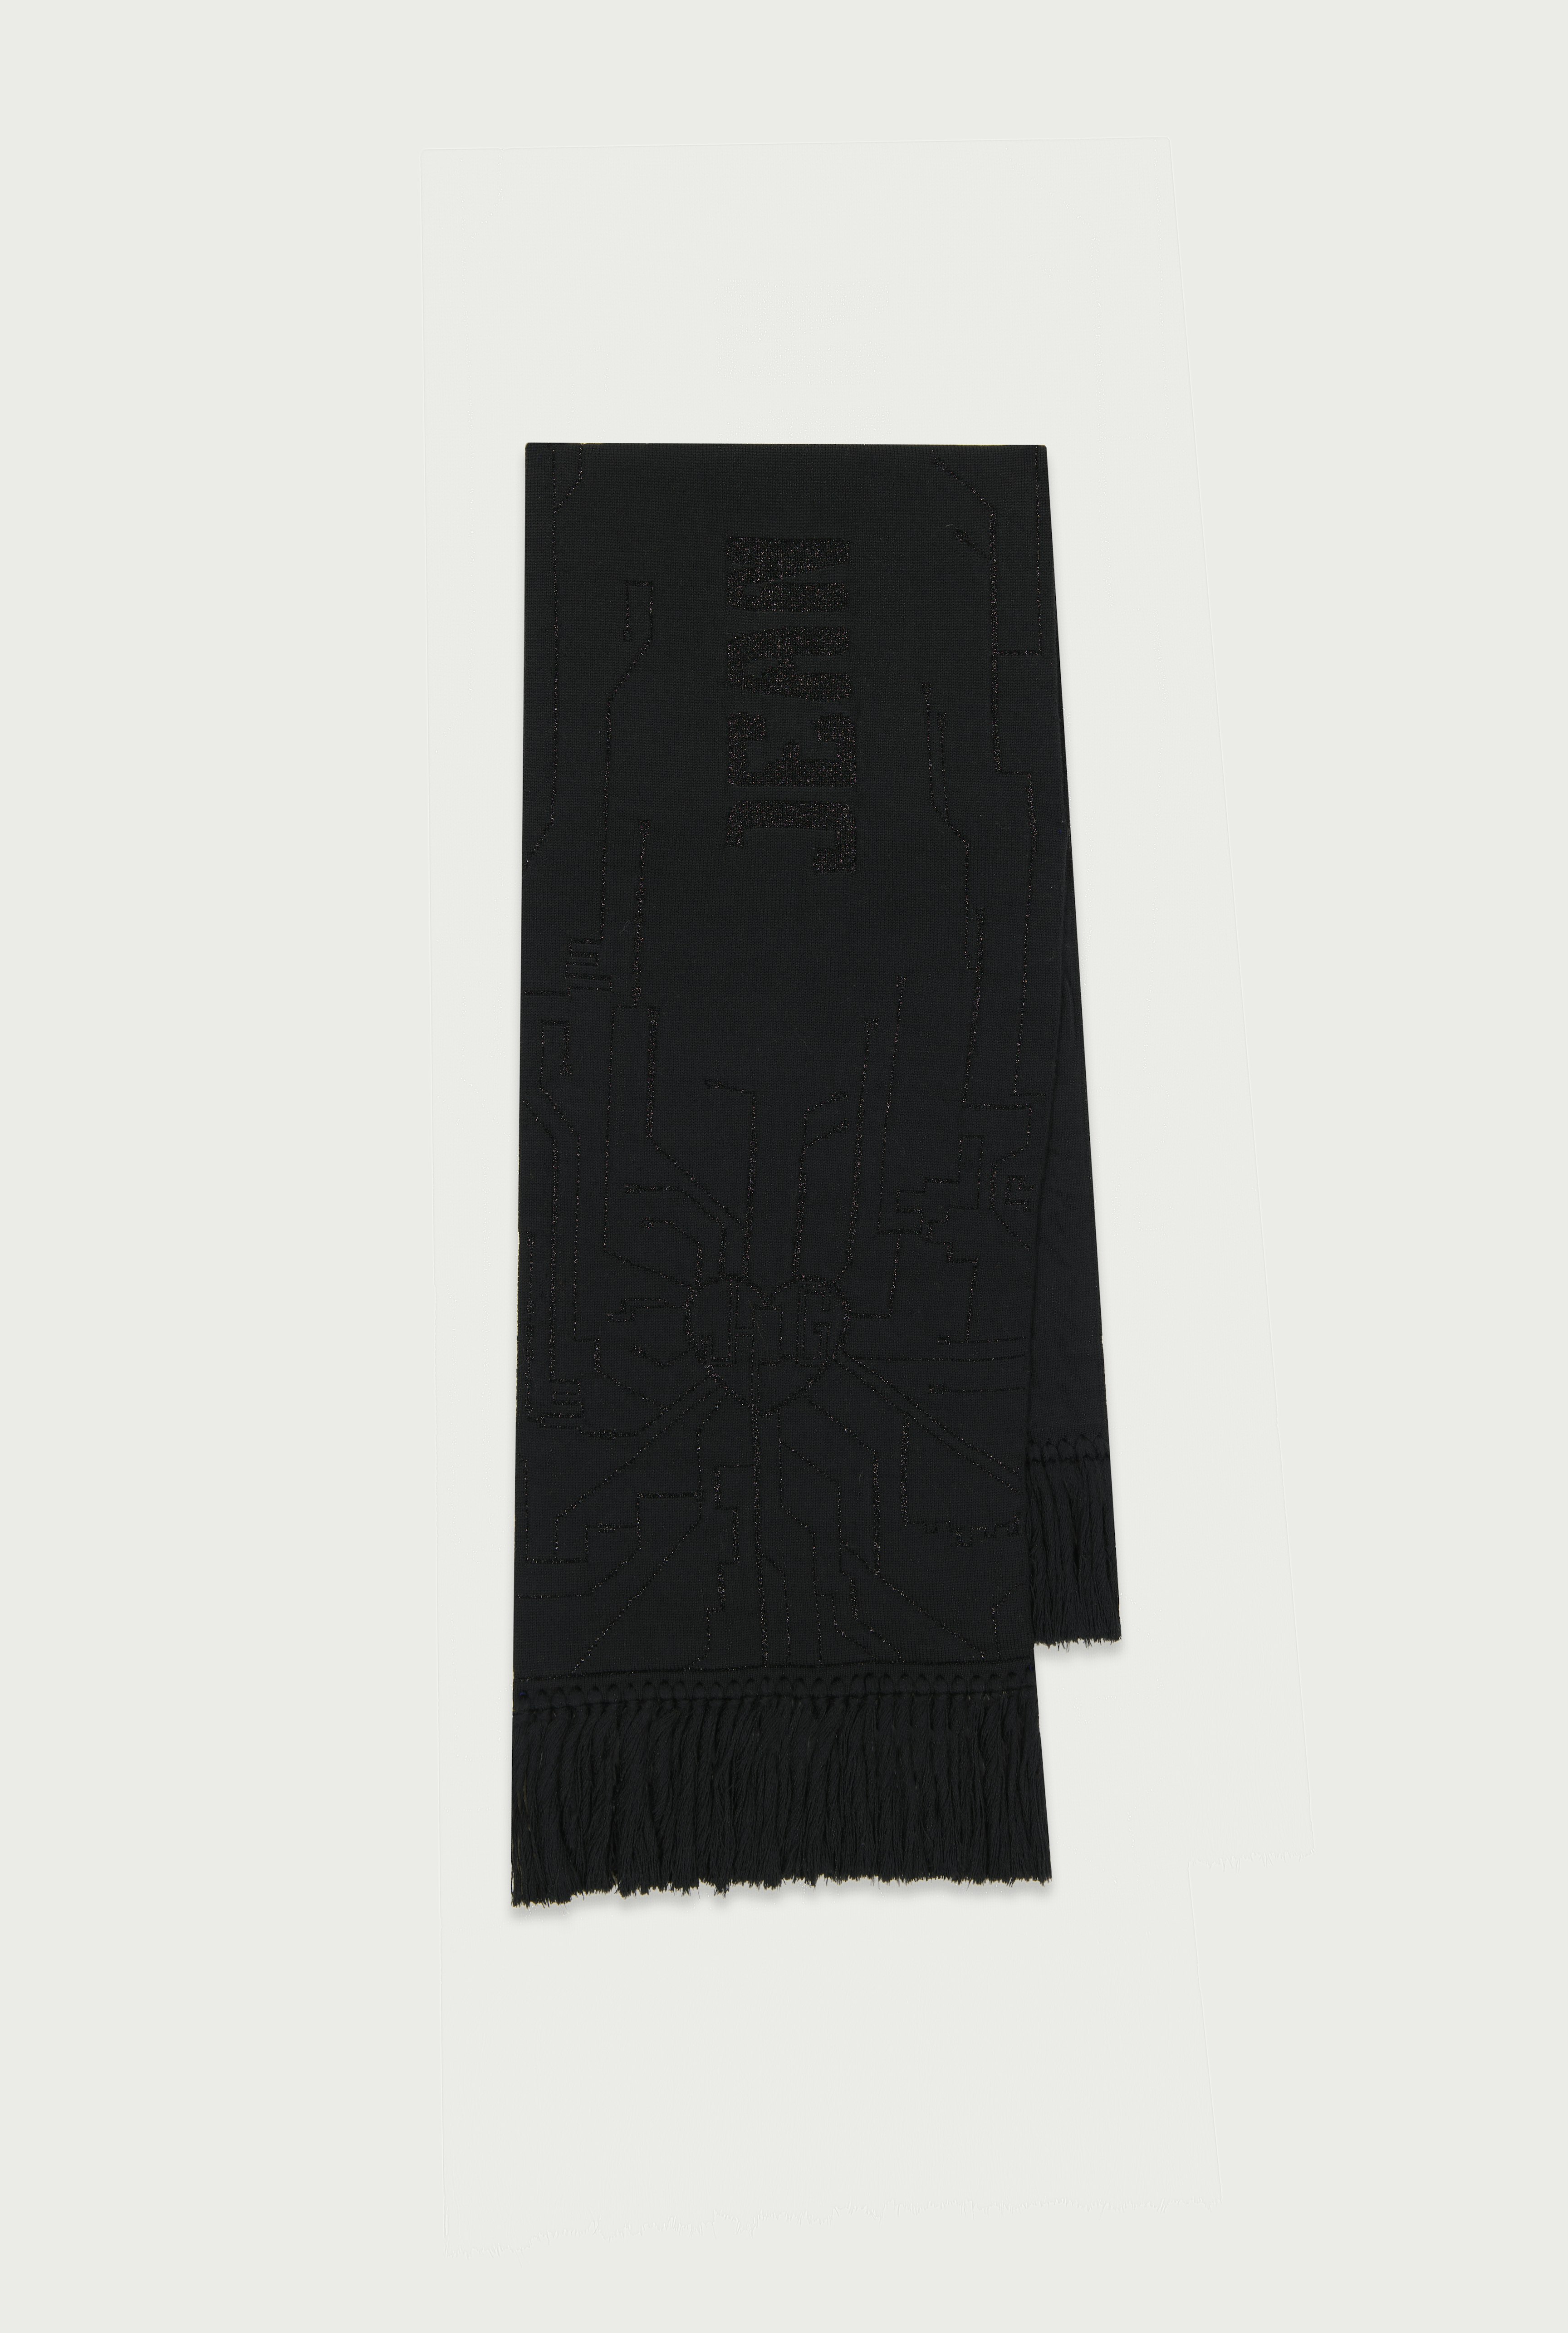 The Black Cyber Scarf